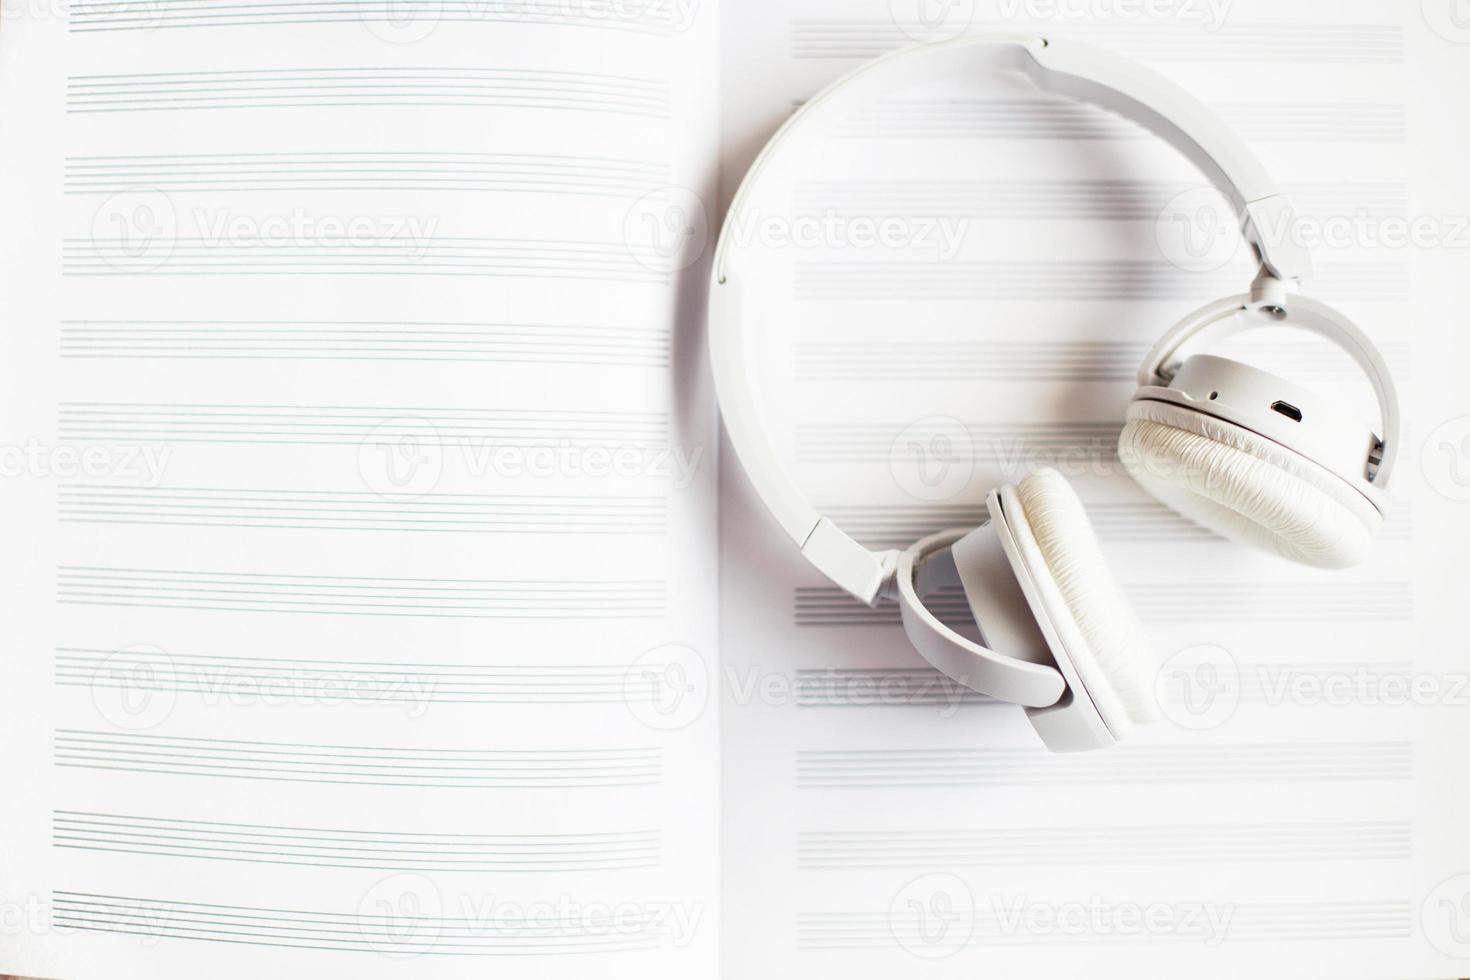 white headphones on a notebook for notes on a white background photo